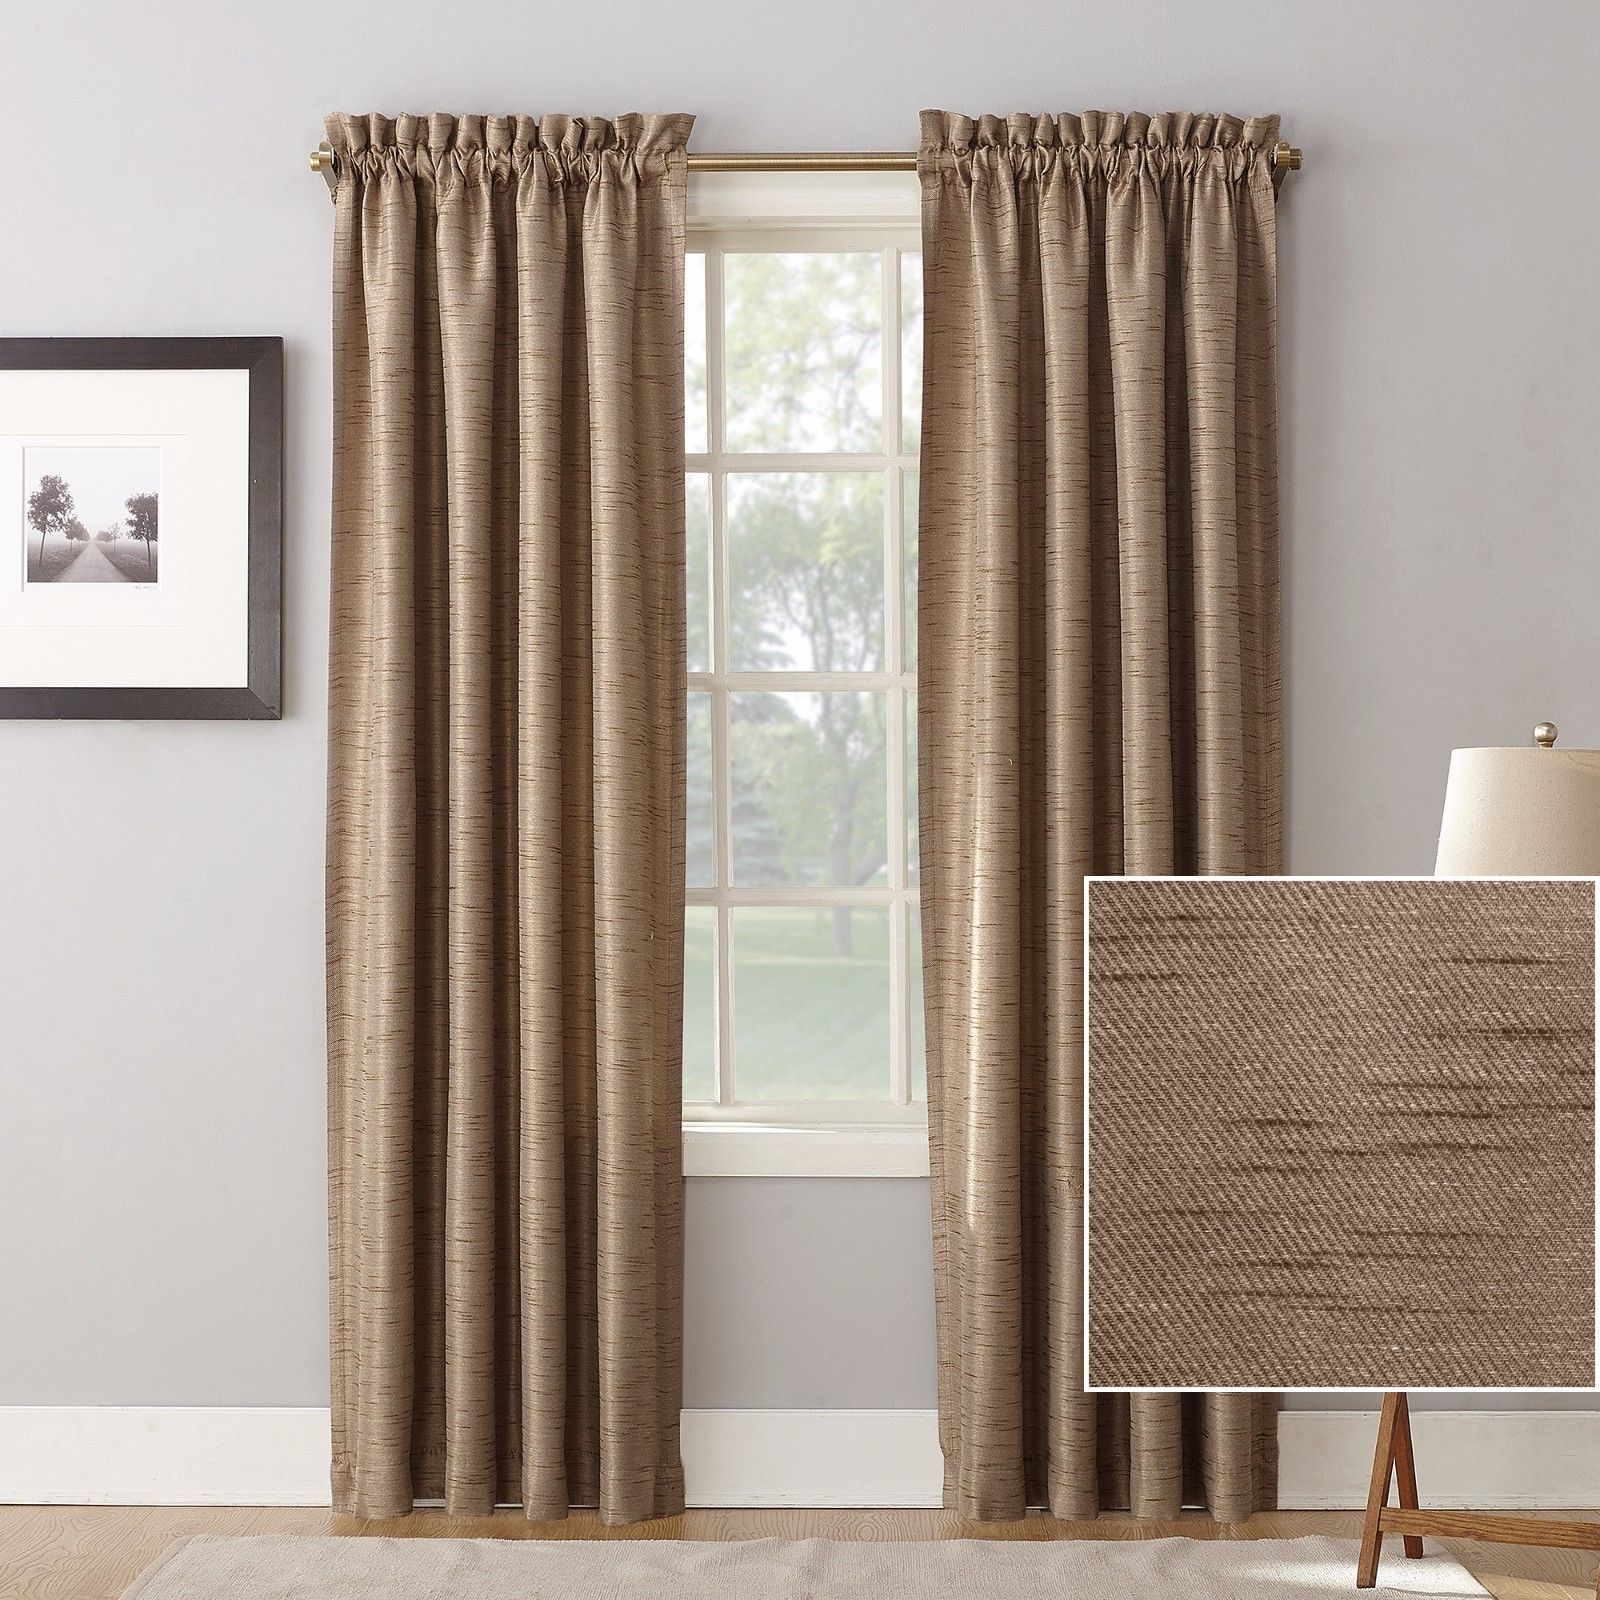 Light Brown Premium Textured Weave Thermal Blackout Curtains Panels